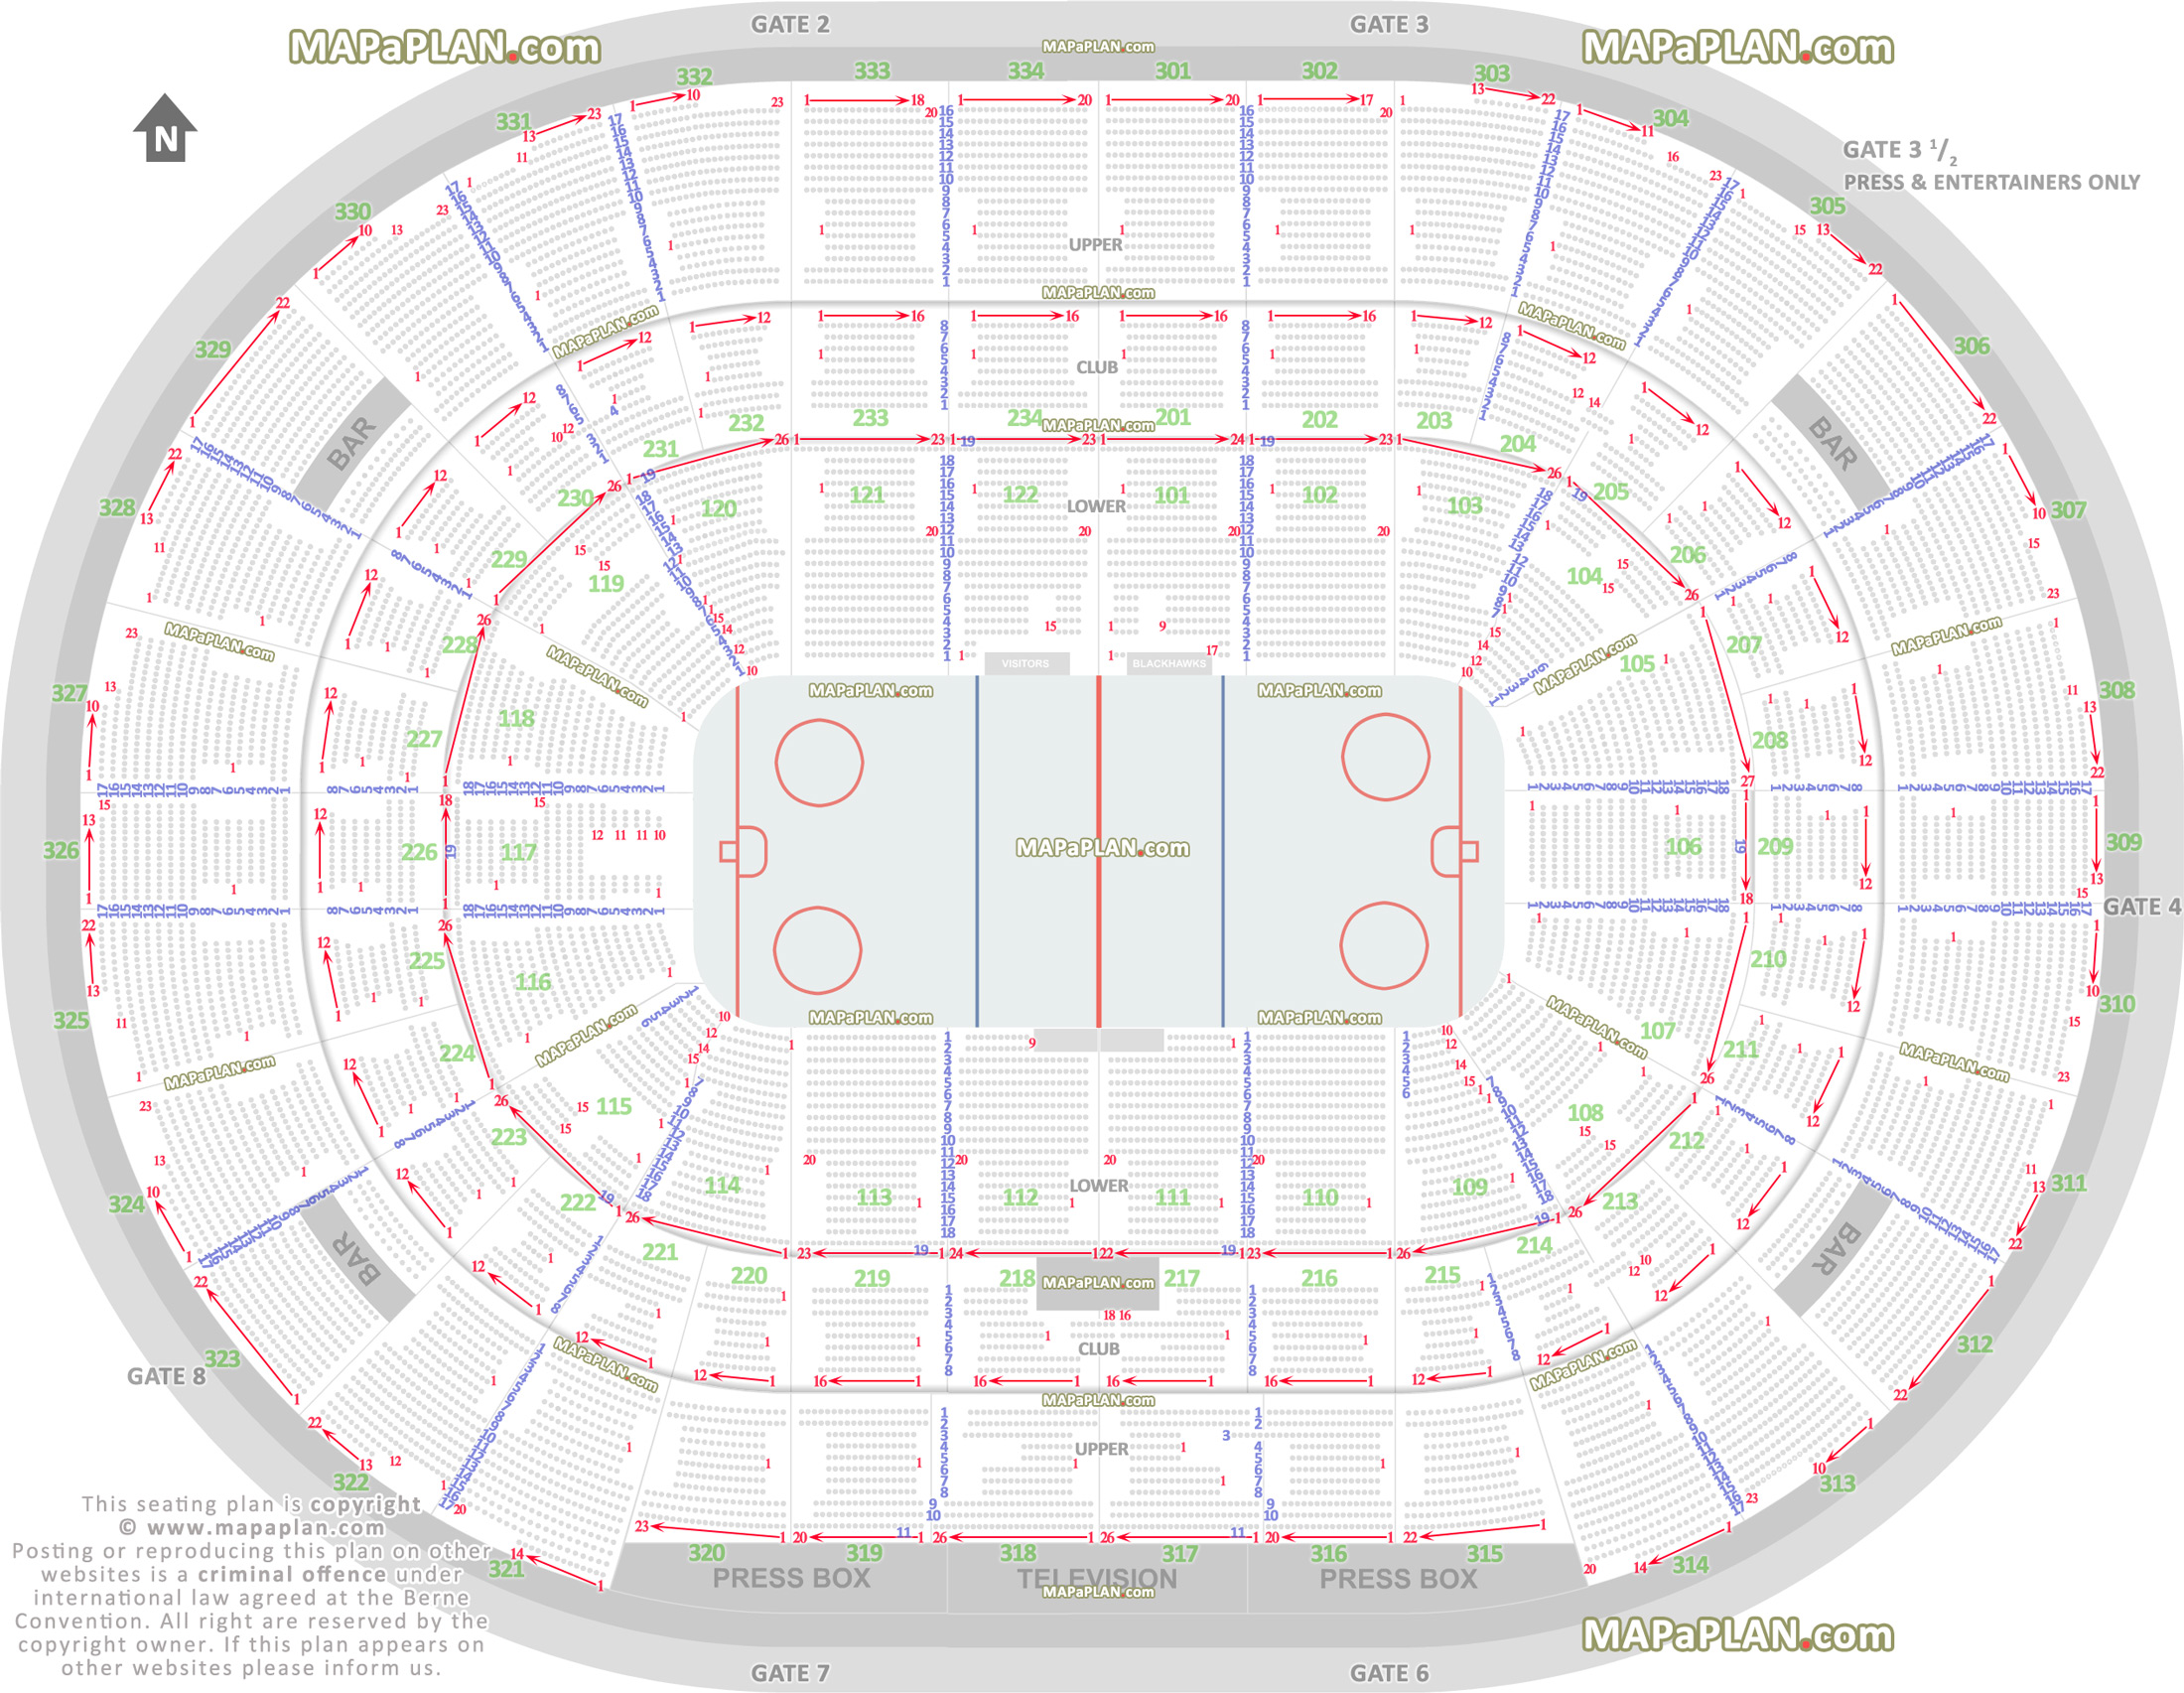 Chicago United Center seat numbers detailed seating plan 